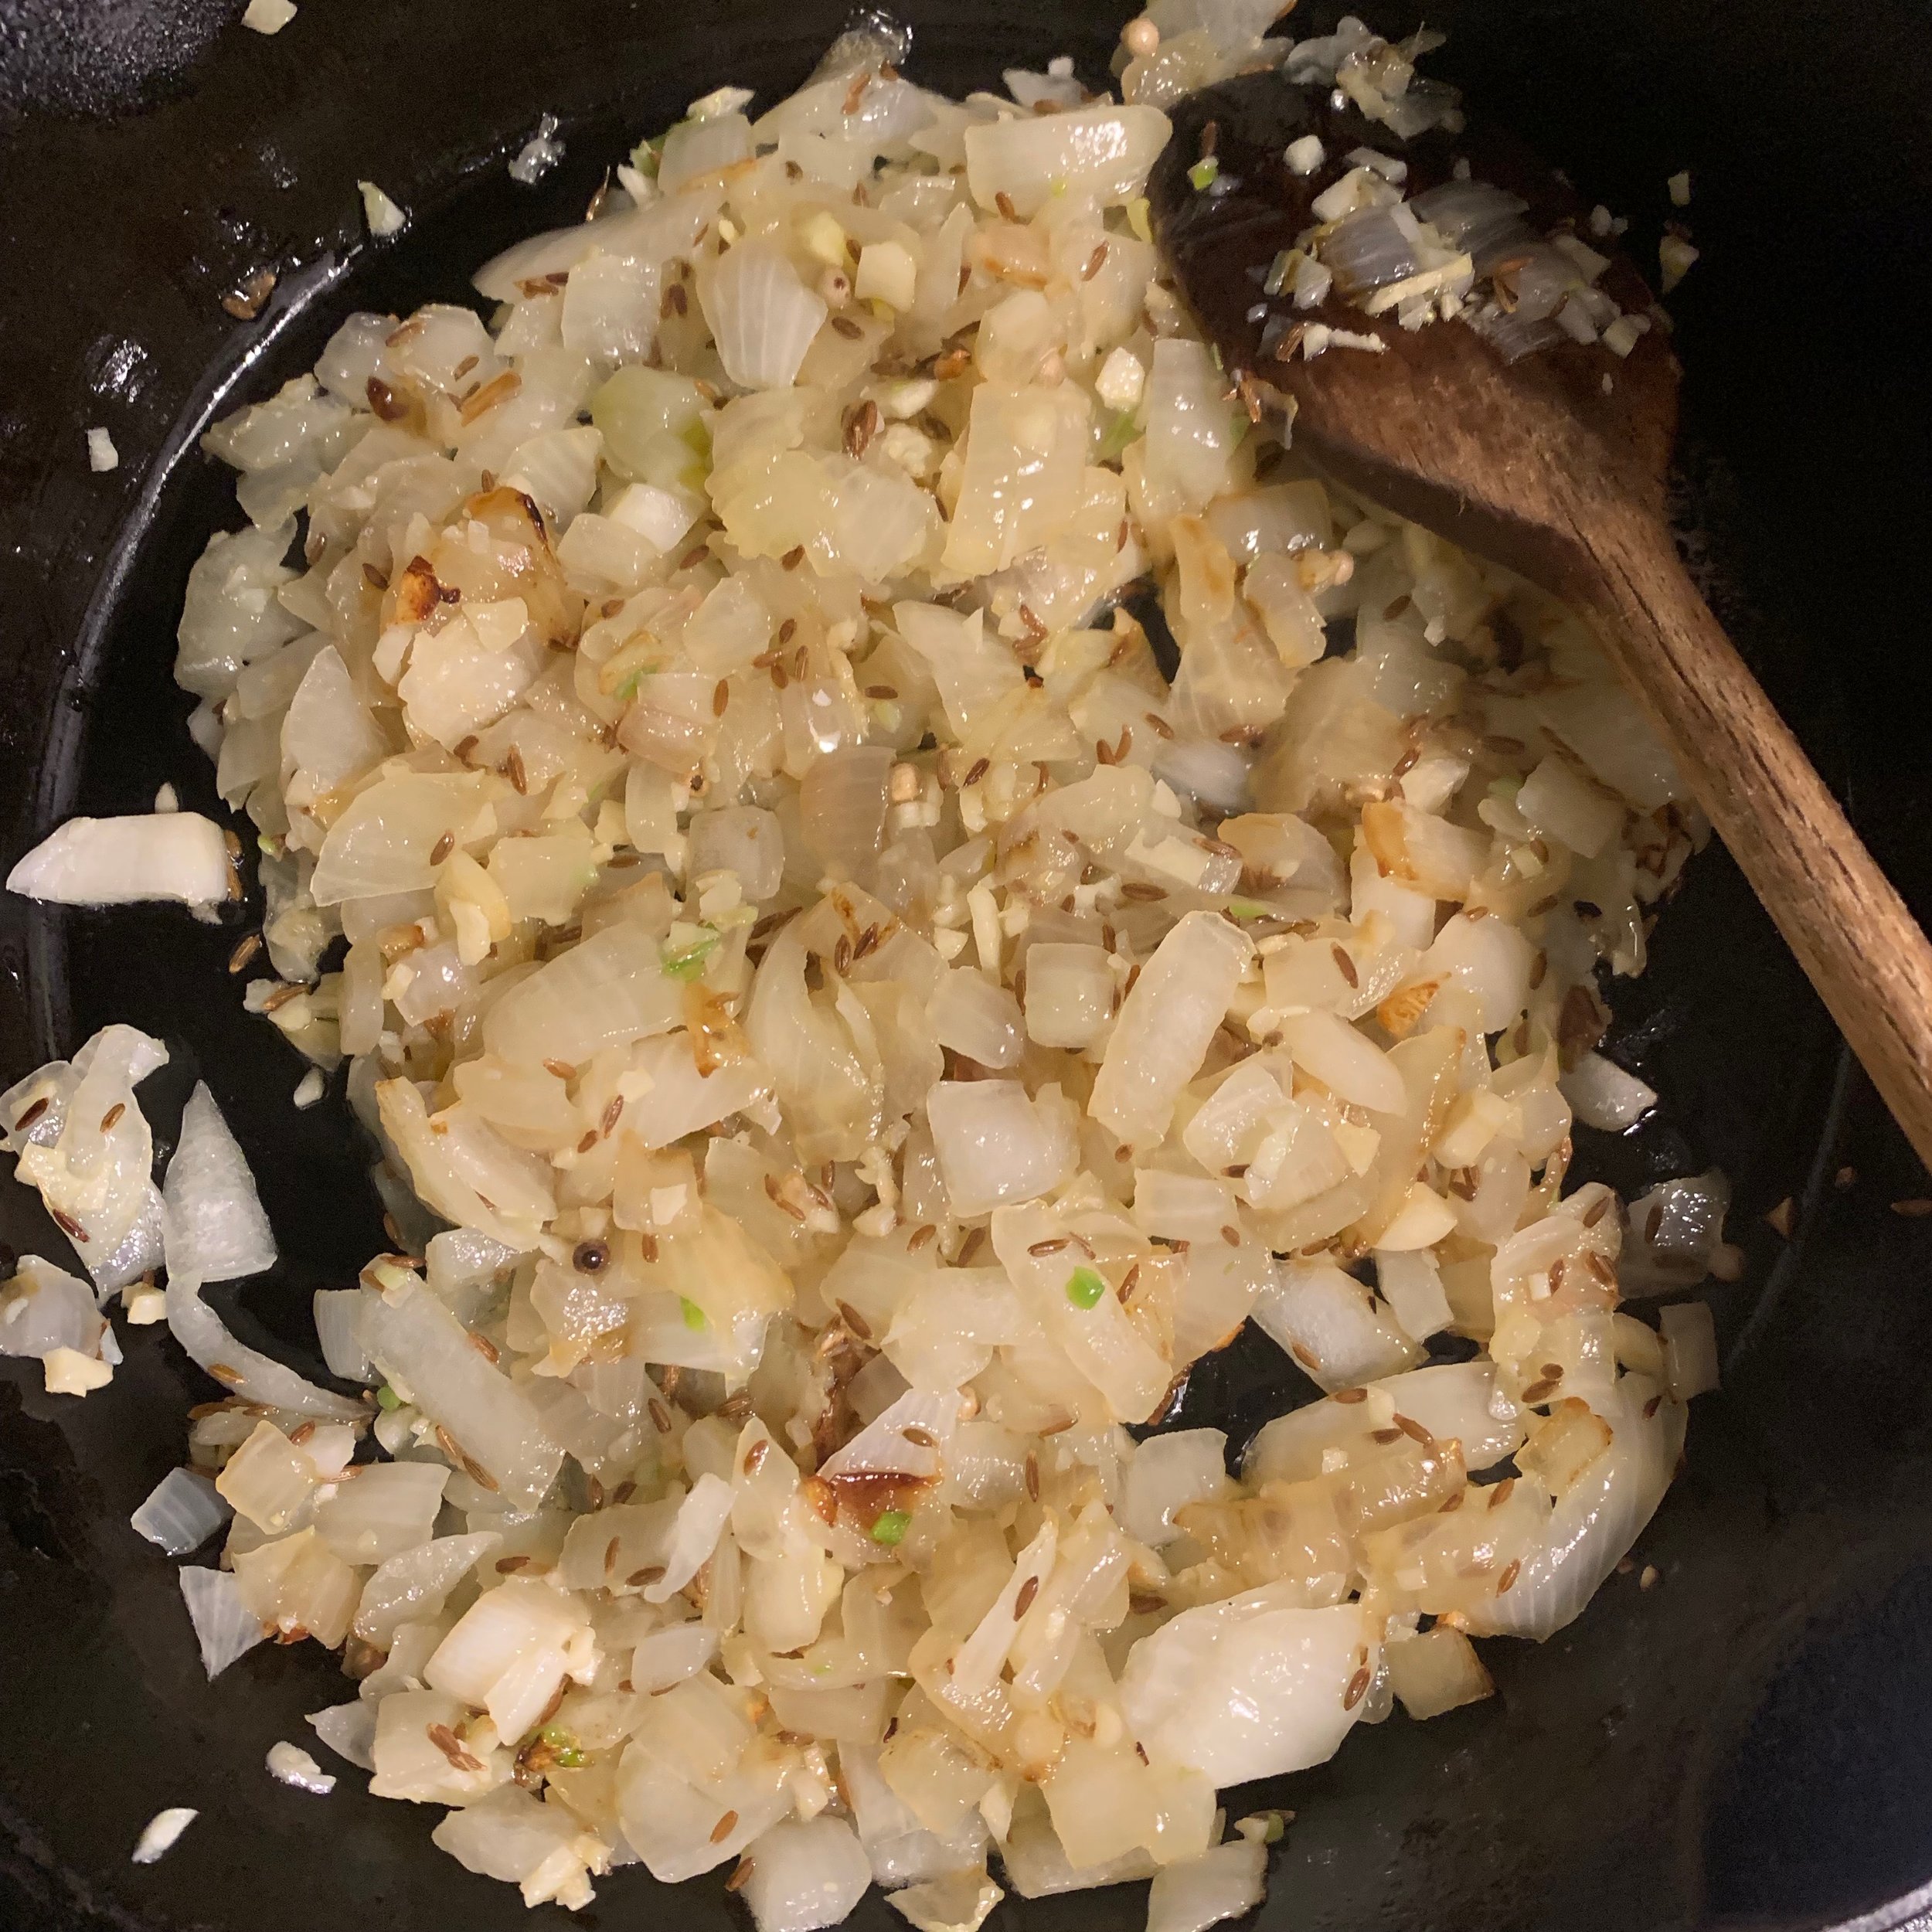 I added some whole cumin and the garlic near the end of the sautéing onions